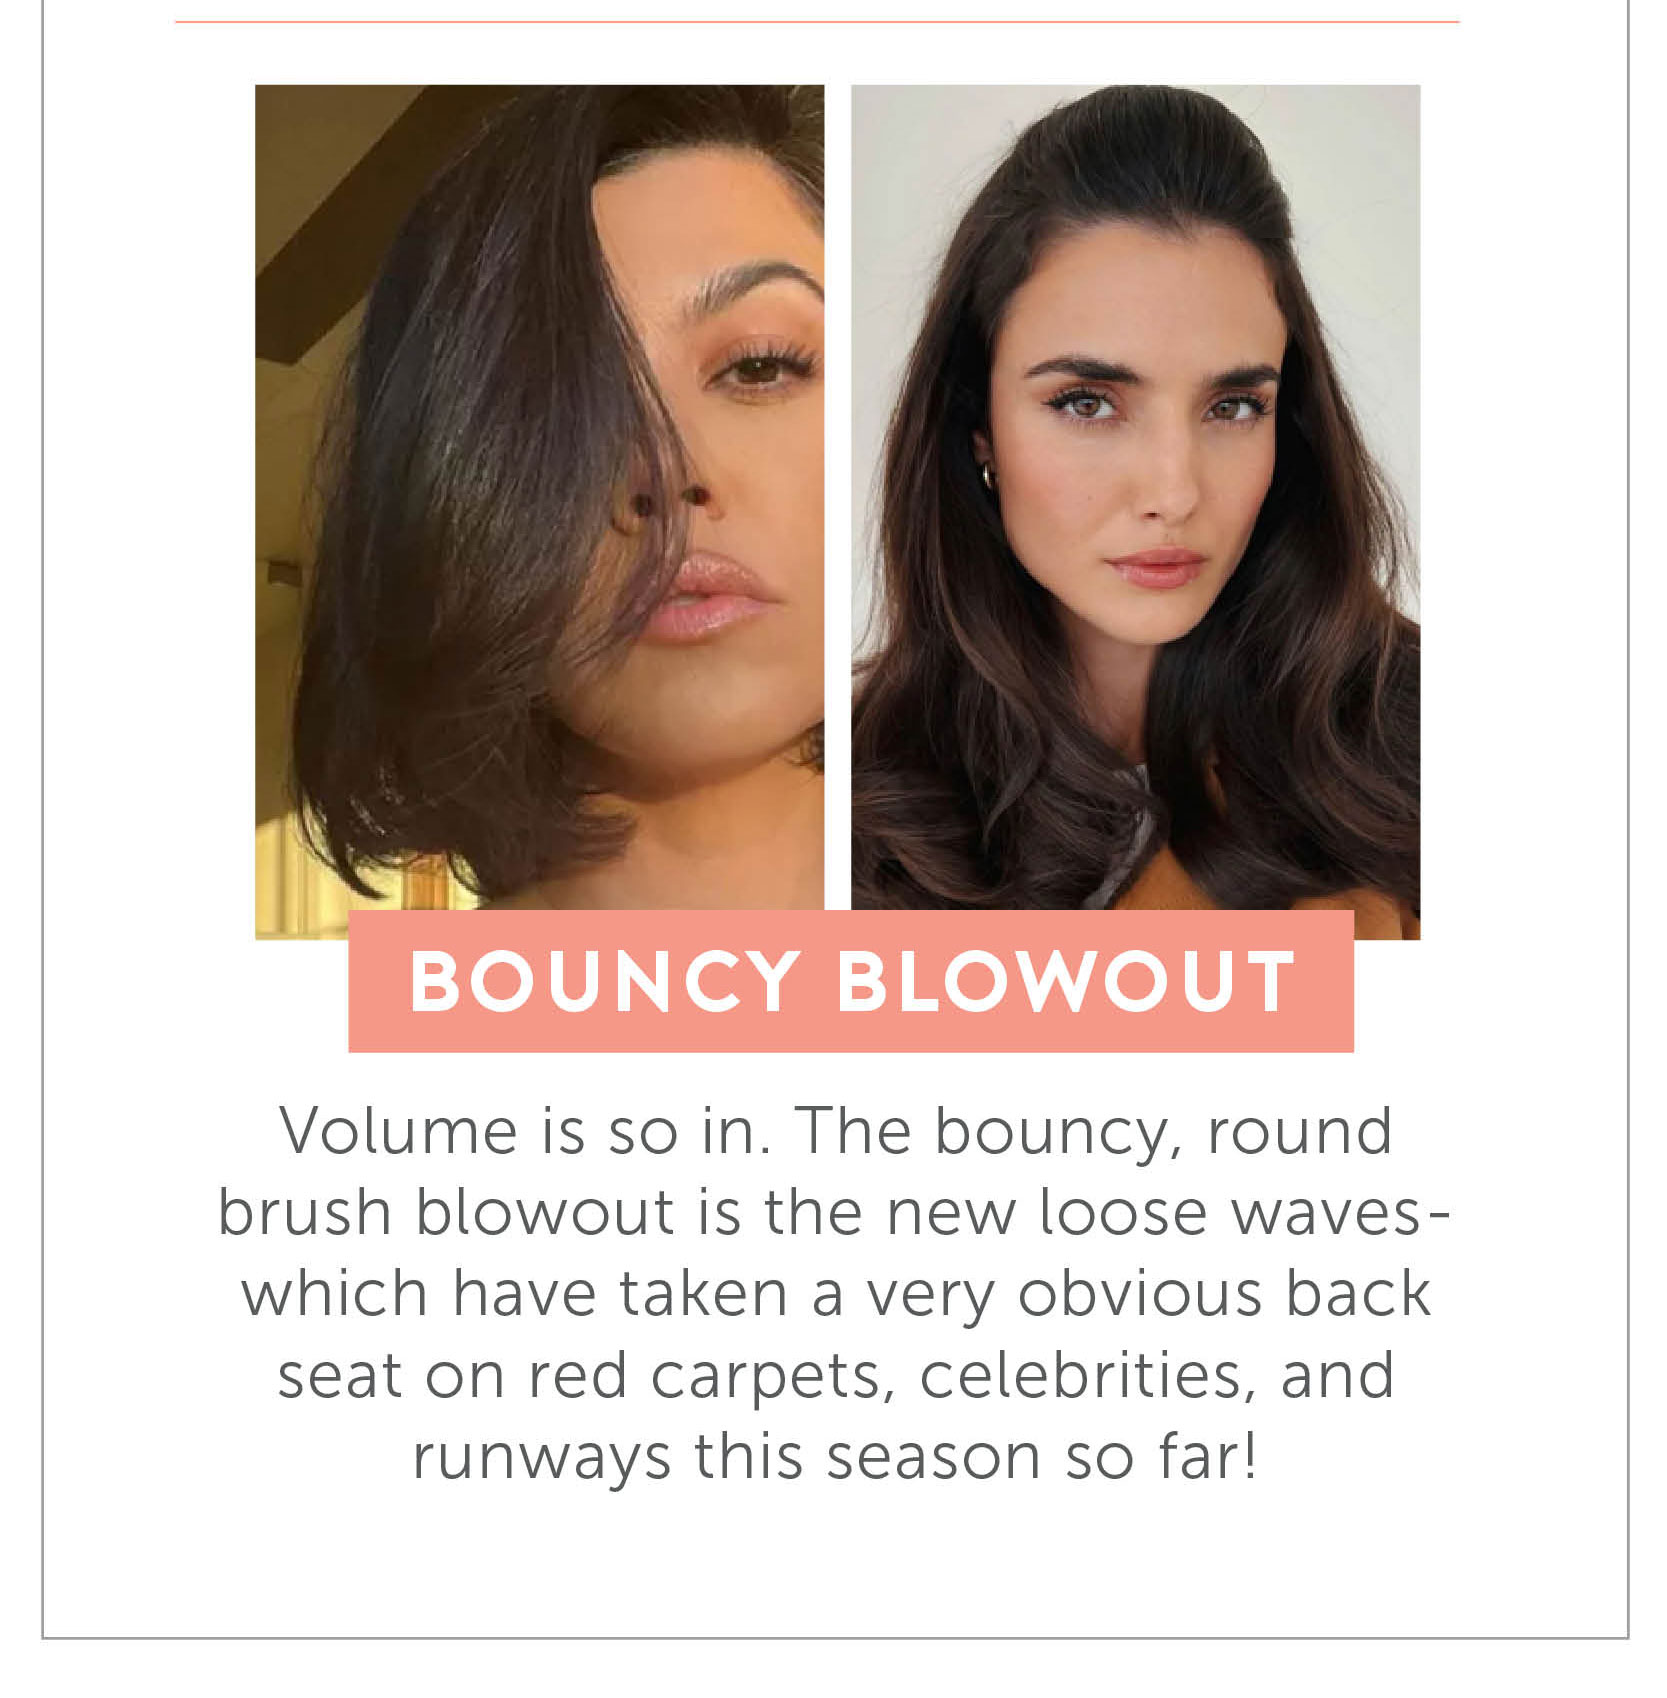 Bouncy Blowout - Volume is So in. The bouncy, round brush blowout is the new loose waves- which have taken a very obvious back seat on red carpets, celebrities, and runways this season so far!